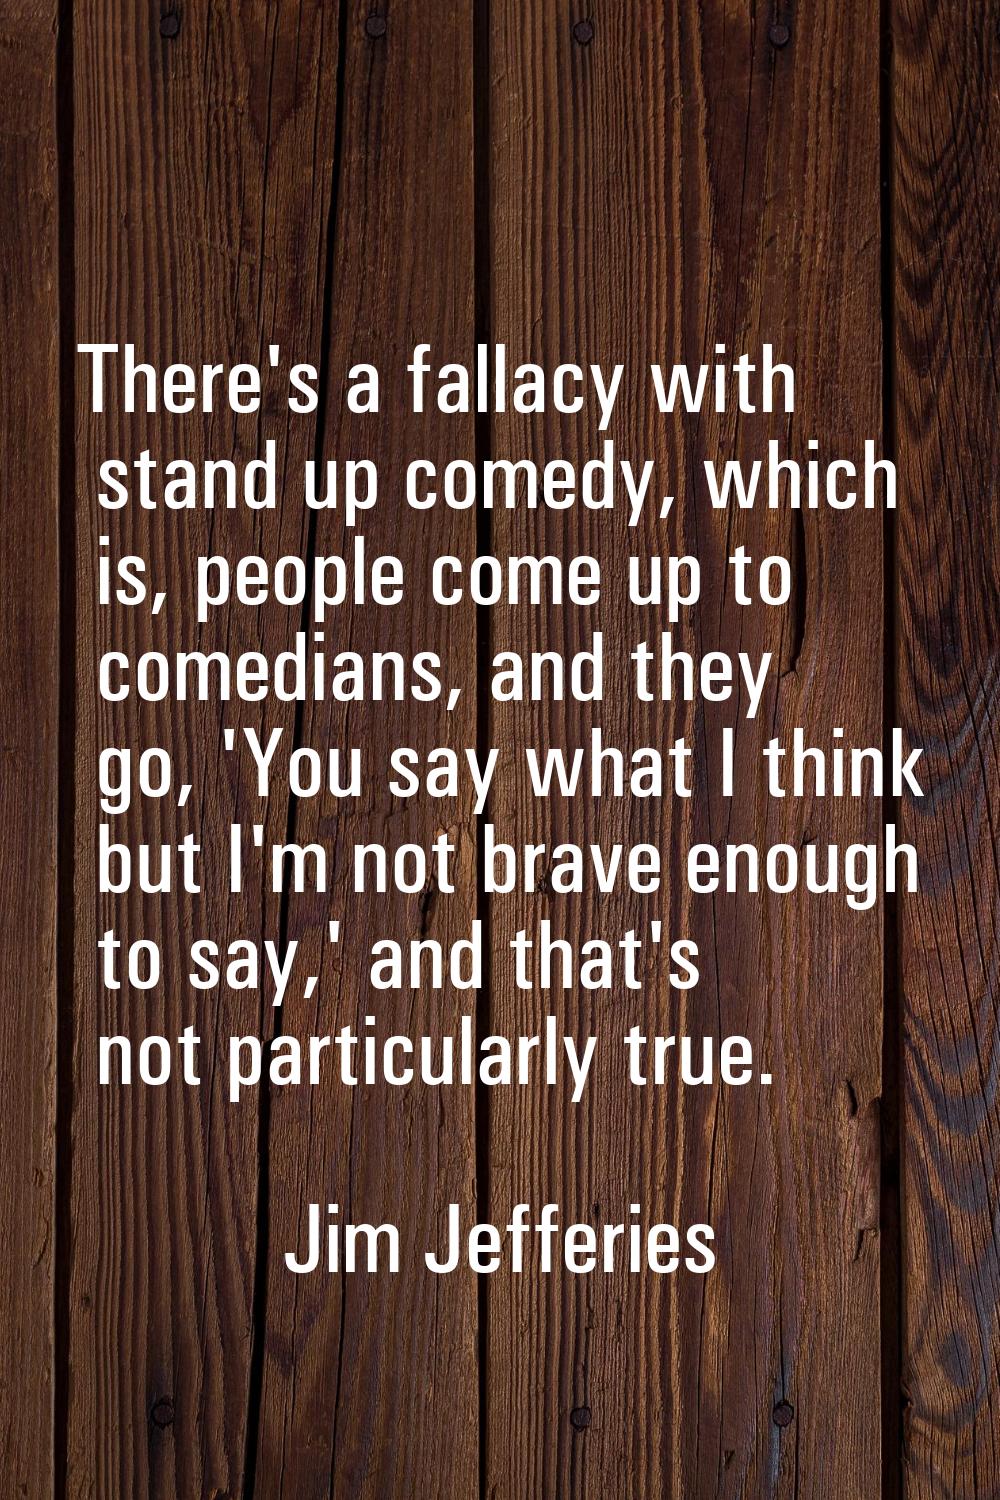 There's a fallacy with stand up comedy, which is, people come up to comedians, and they go, 'You sa